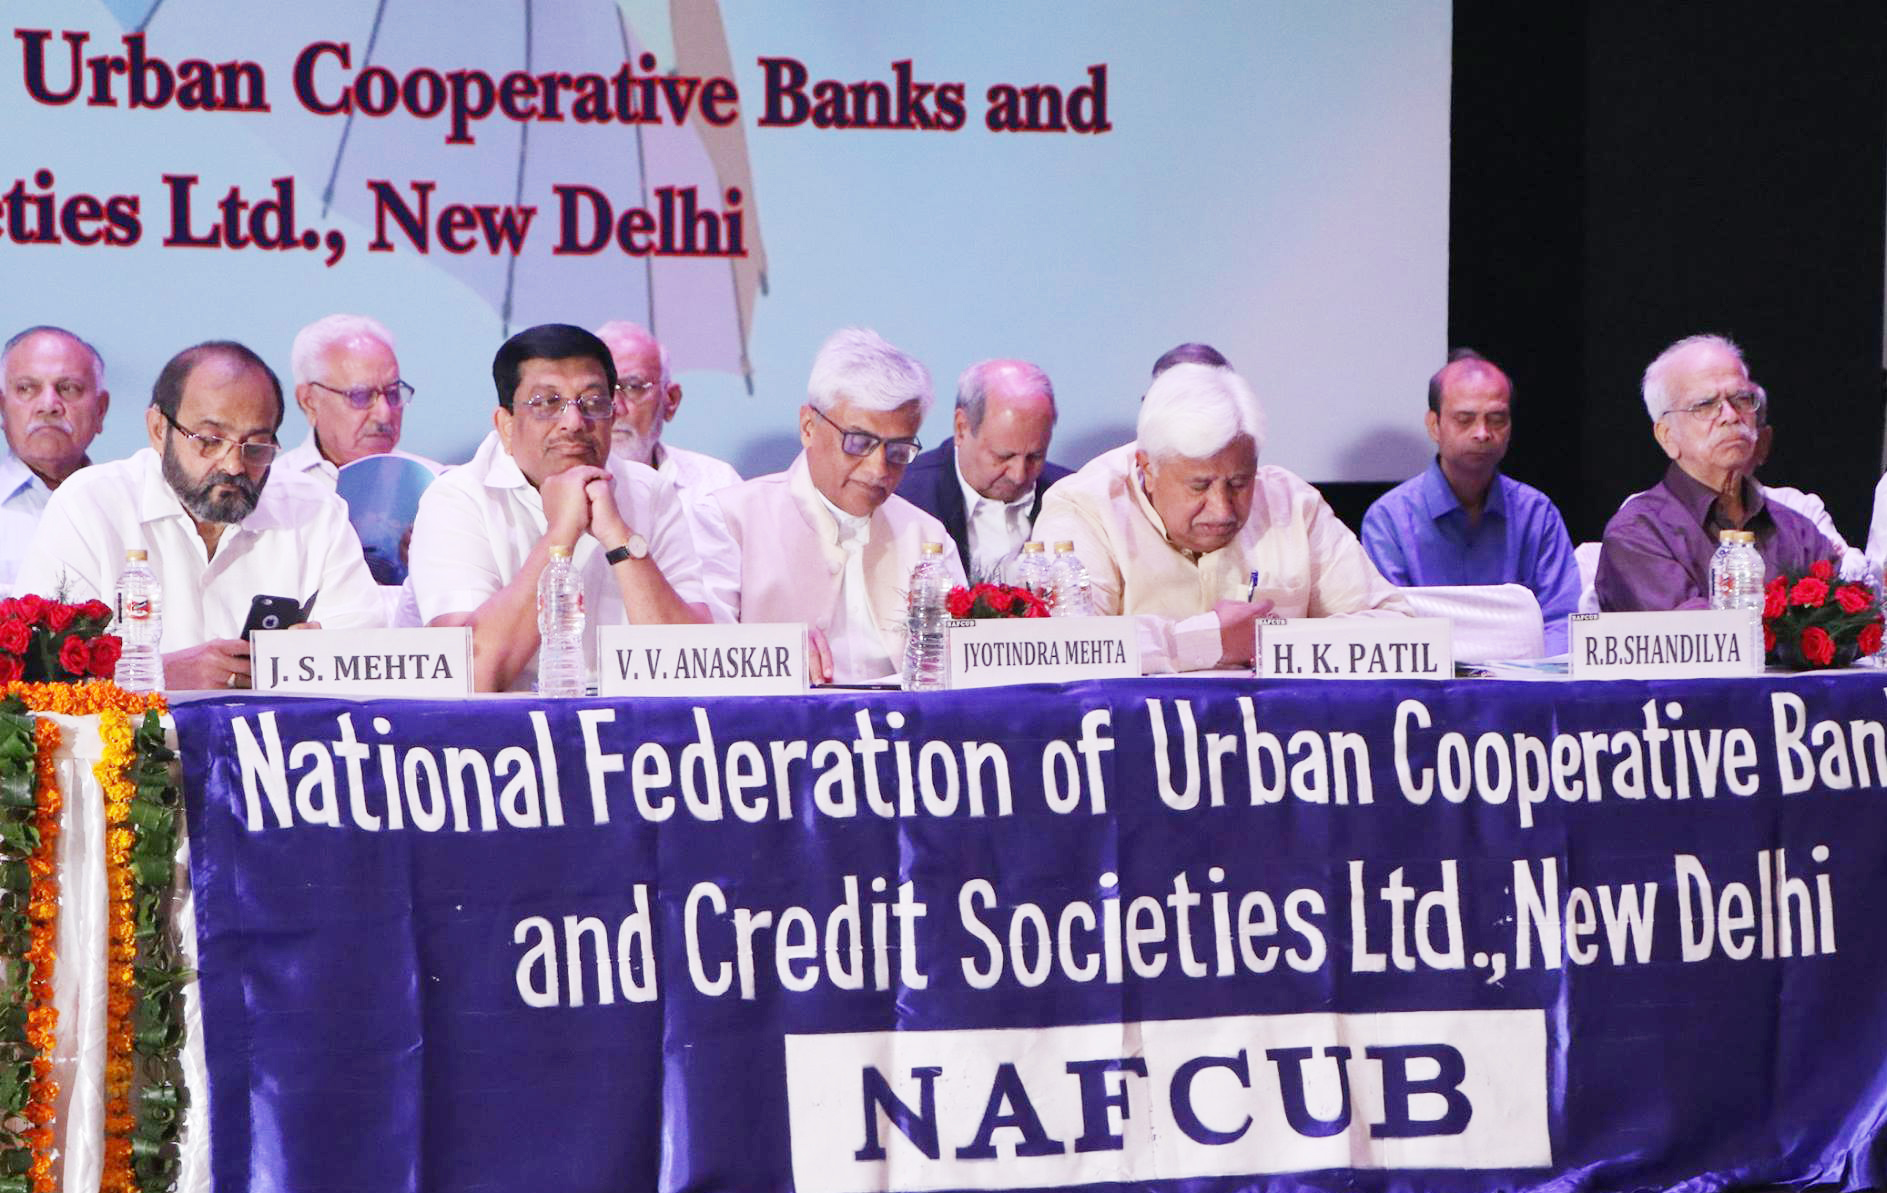 NAFCUB Board meets at NCUI, announcement of election dates likely – Indian Cooperative1887 x 1193